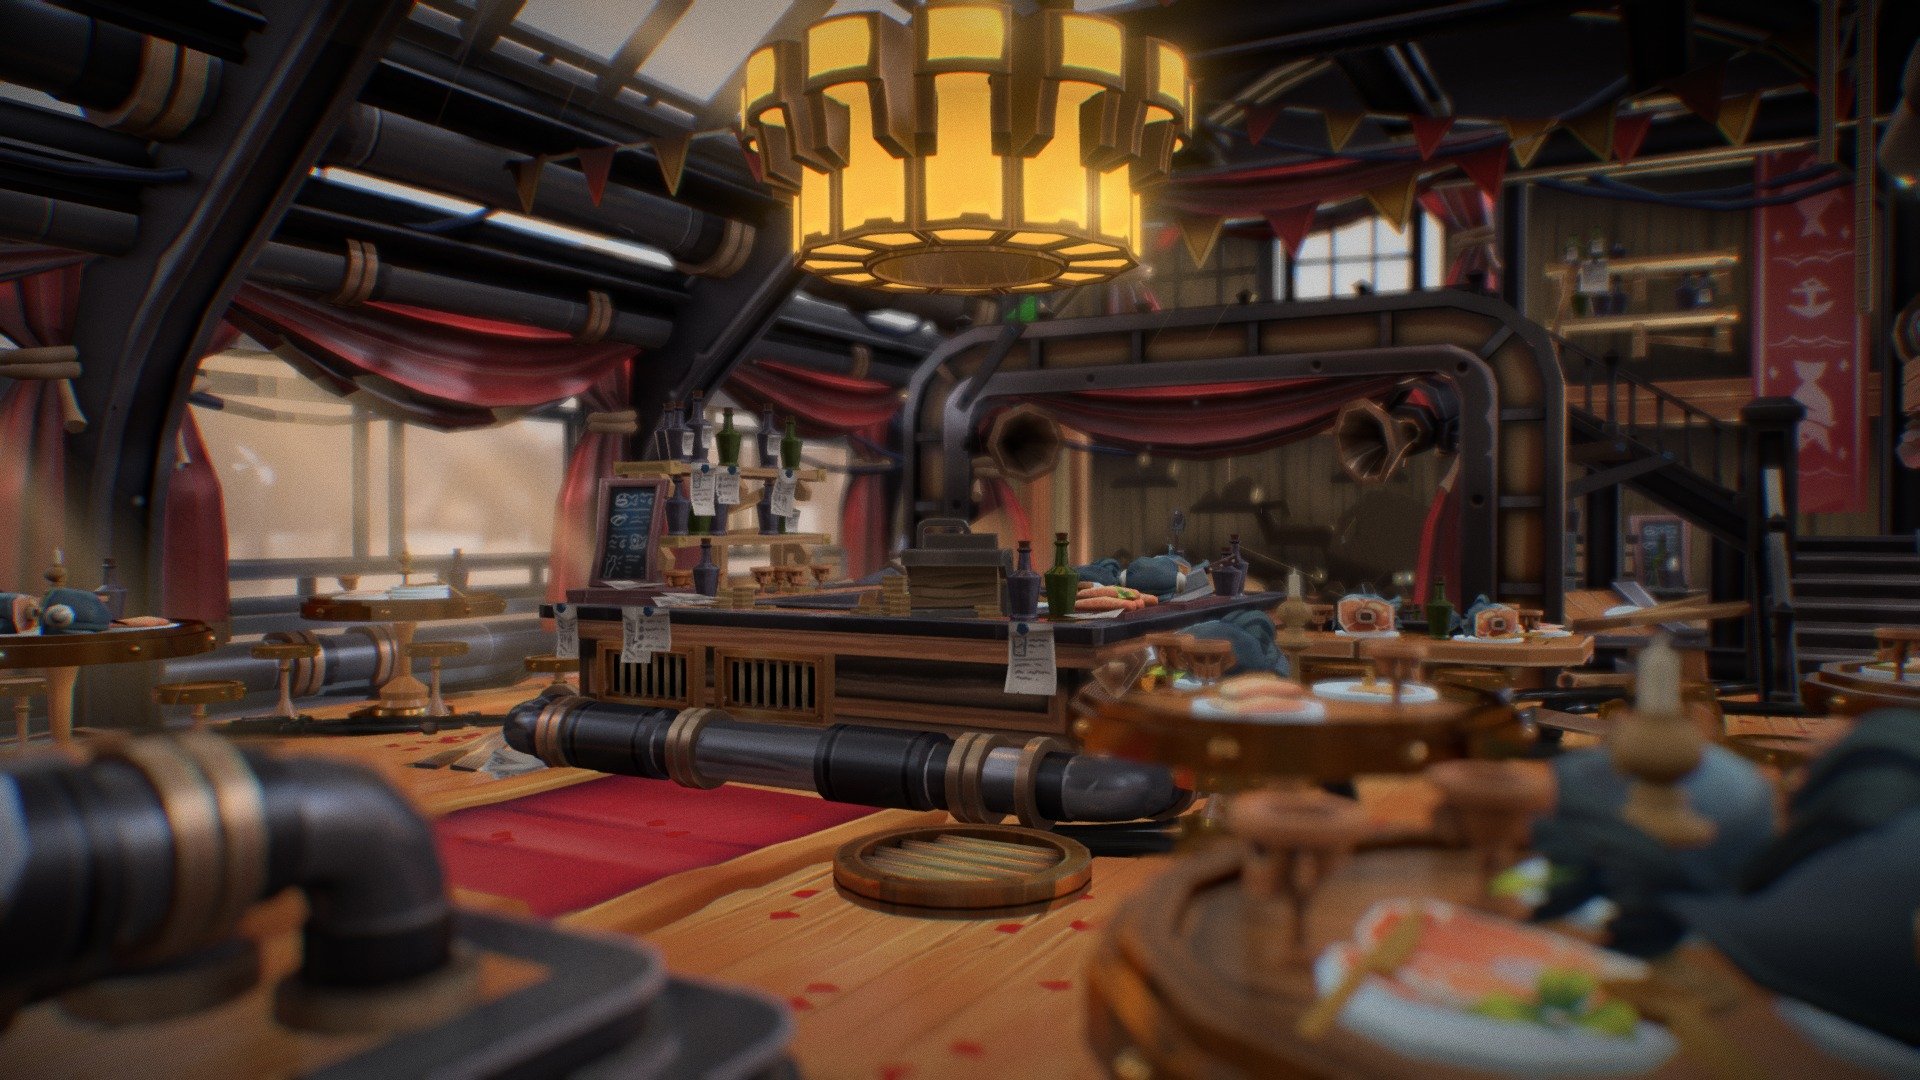 A steampunk cabaret high above the skies I created with the help of my friend Mathilde (sketchfab.com/mathoumate). 🐭
I tried a different look with my sketchfab render I hope you'll like it! - Steampunk cabaret bar - 3D model by Malef - Clément Campargue (@clement_campargue) 3d model